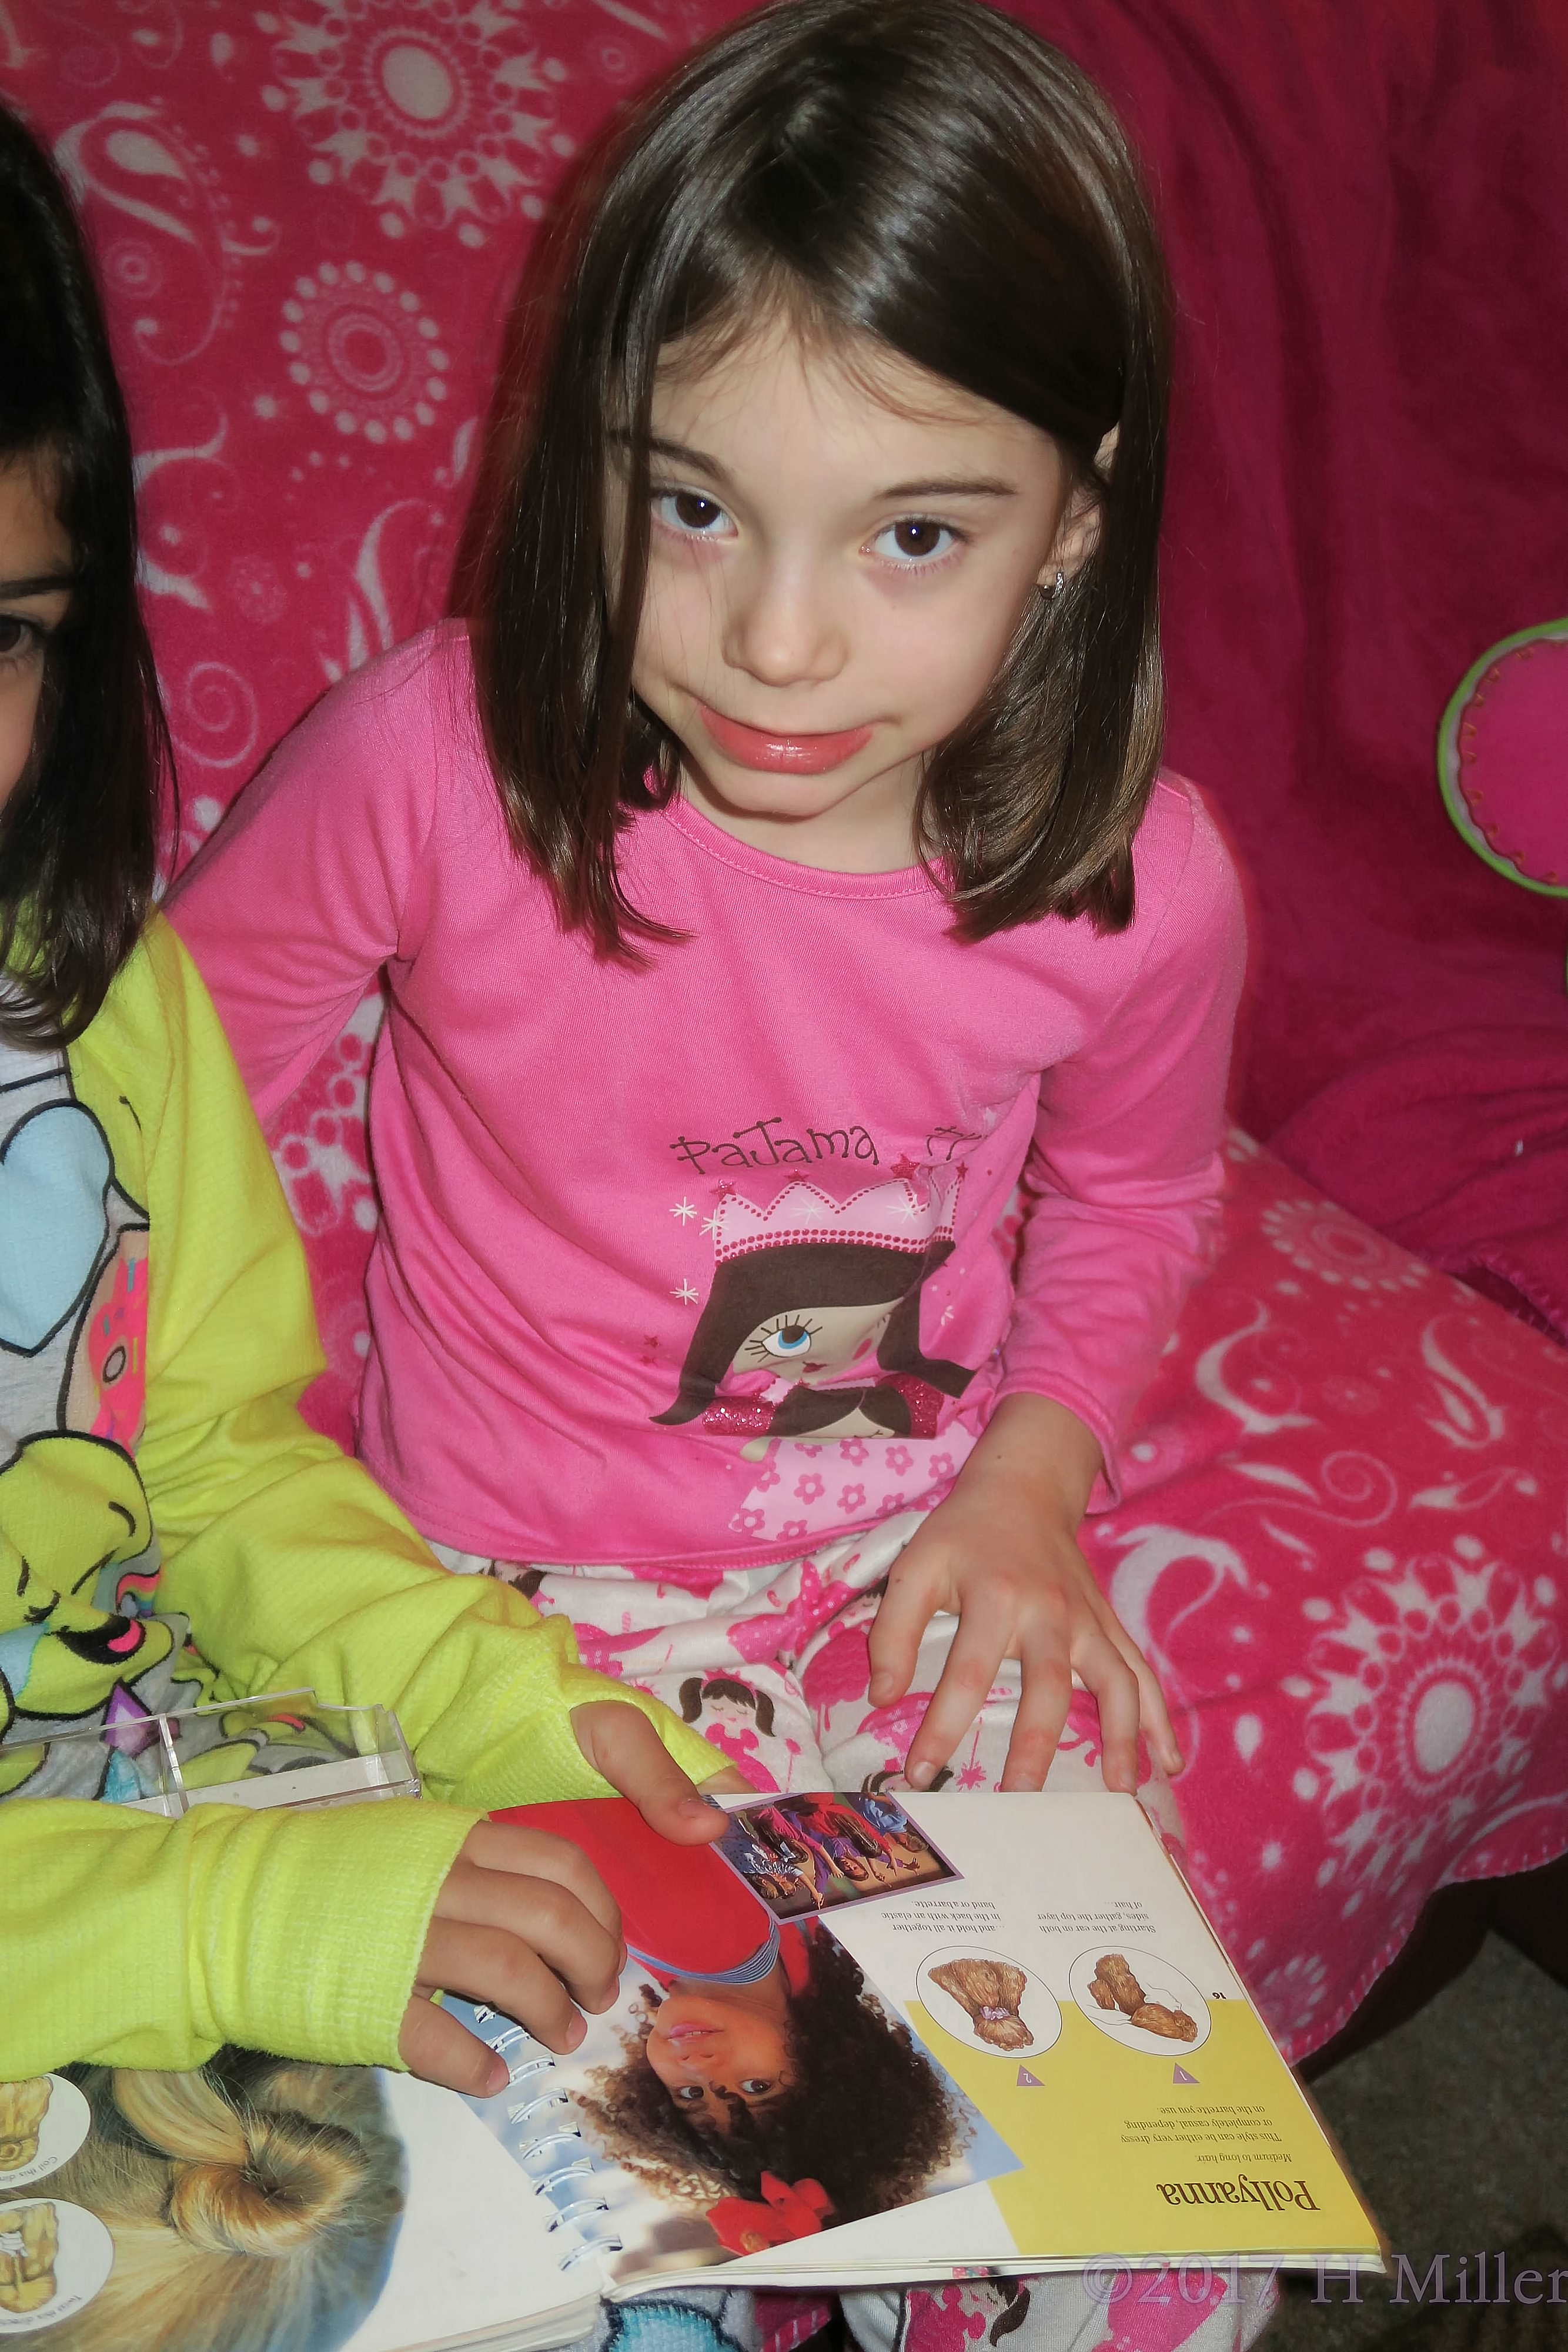 Madison Reading The Girls Hairstyles Book. 